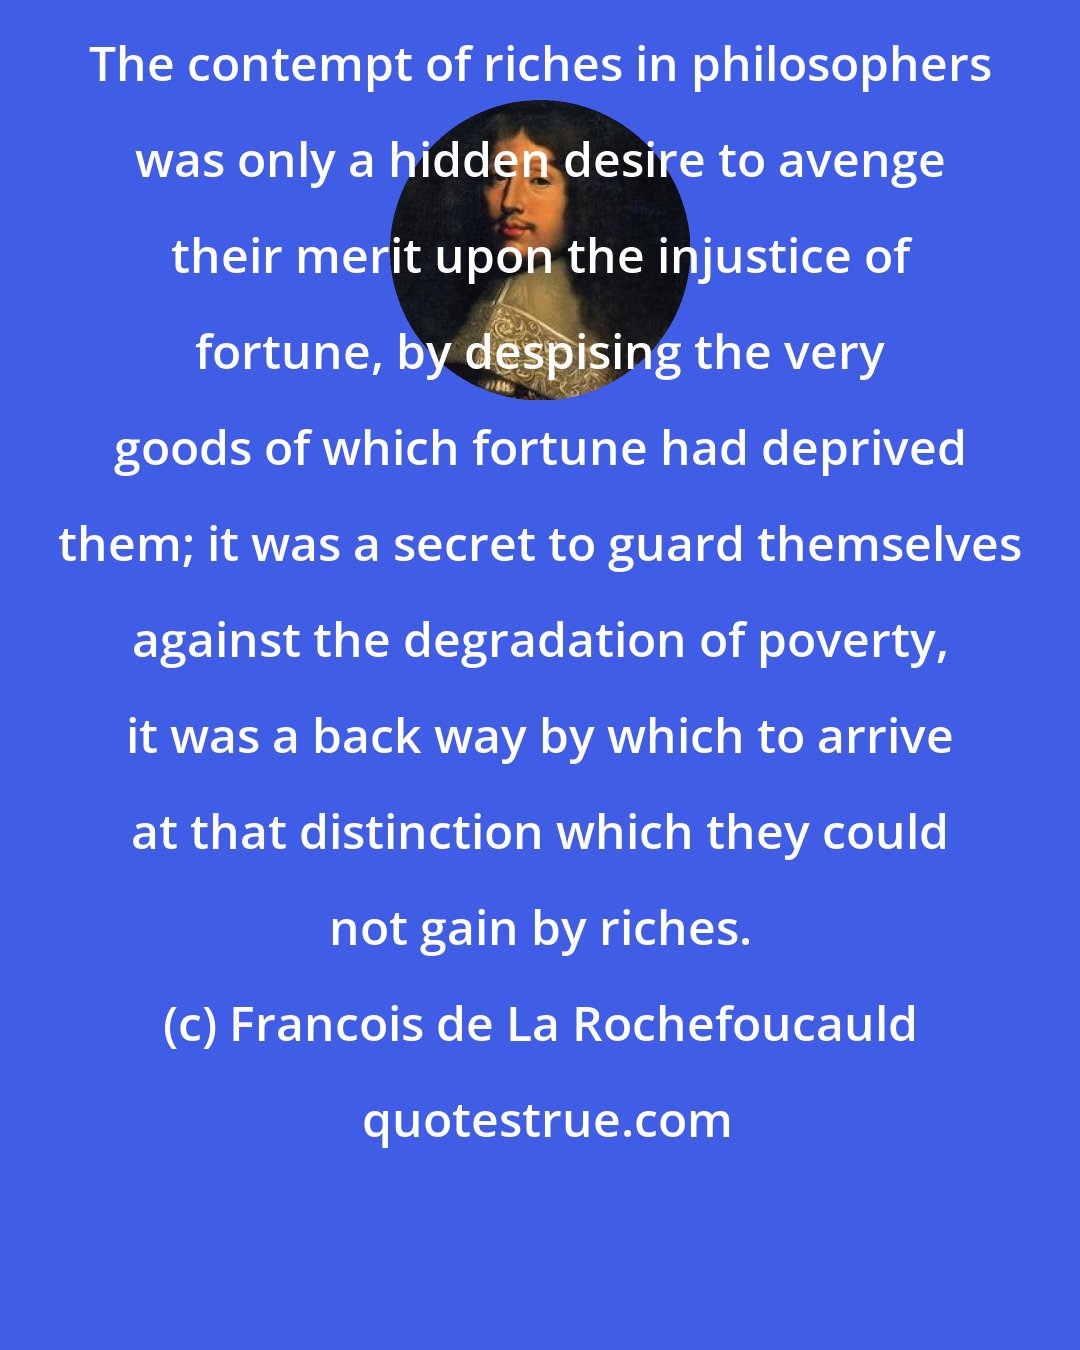 Francois de La Rochefoucauld: The contempt of riches in philosophers was only a hidden desire to avenge their merit upon the injustice of fortune, by despising the very goods of which fortune had deprived them; it was a secret to guard themselves against the degradation of poverty, it was a back way by which to arrive at that distinction which they could not gain by riches.